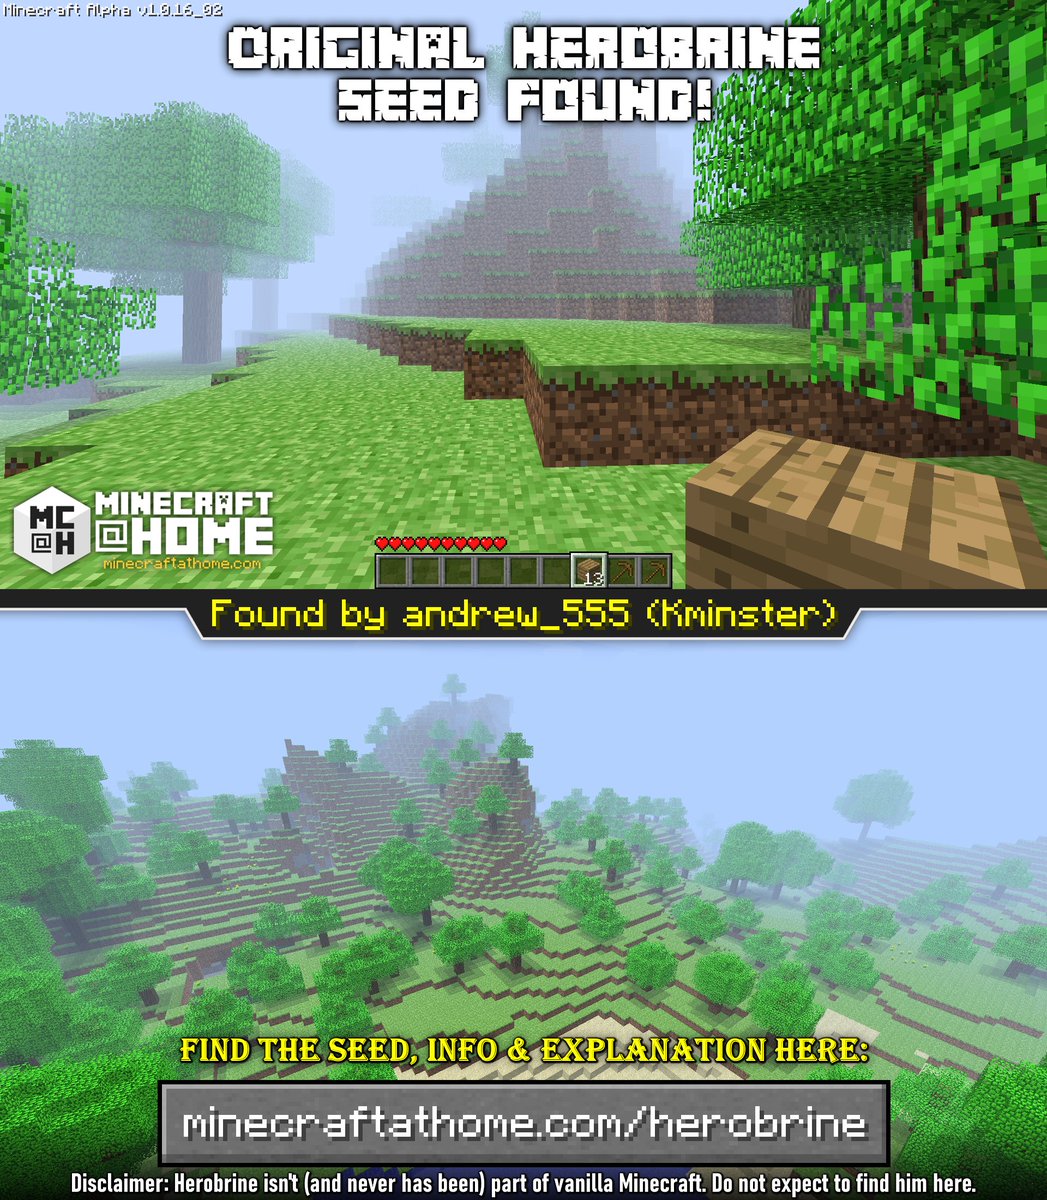 Taylor Harris The Original Minecraft Herobrine World Seed Has Been Found Huge Congrats To The Minecraftathome Team Will Have A Video Up About It Tomorrow At 12pm Et T Co Rcnfhqrnjf